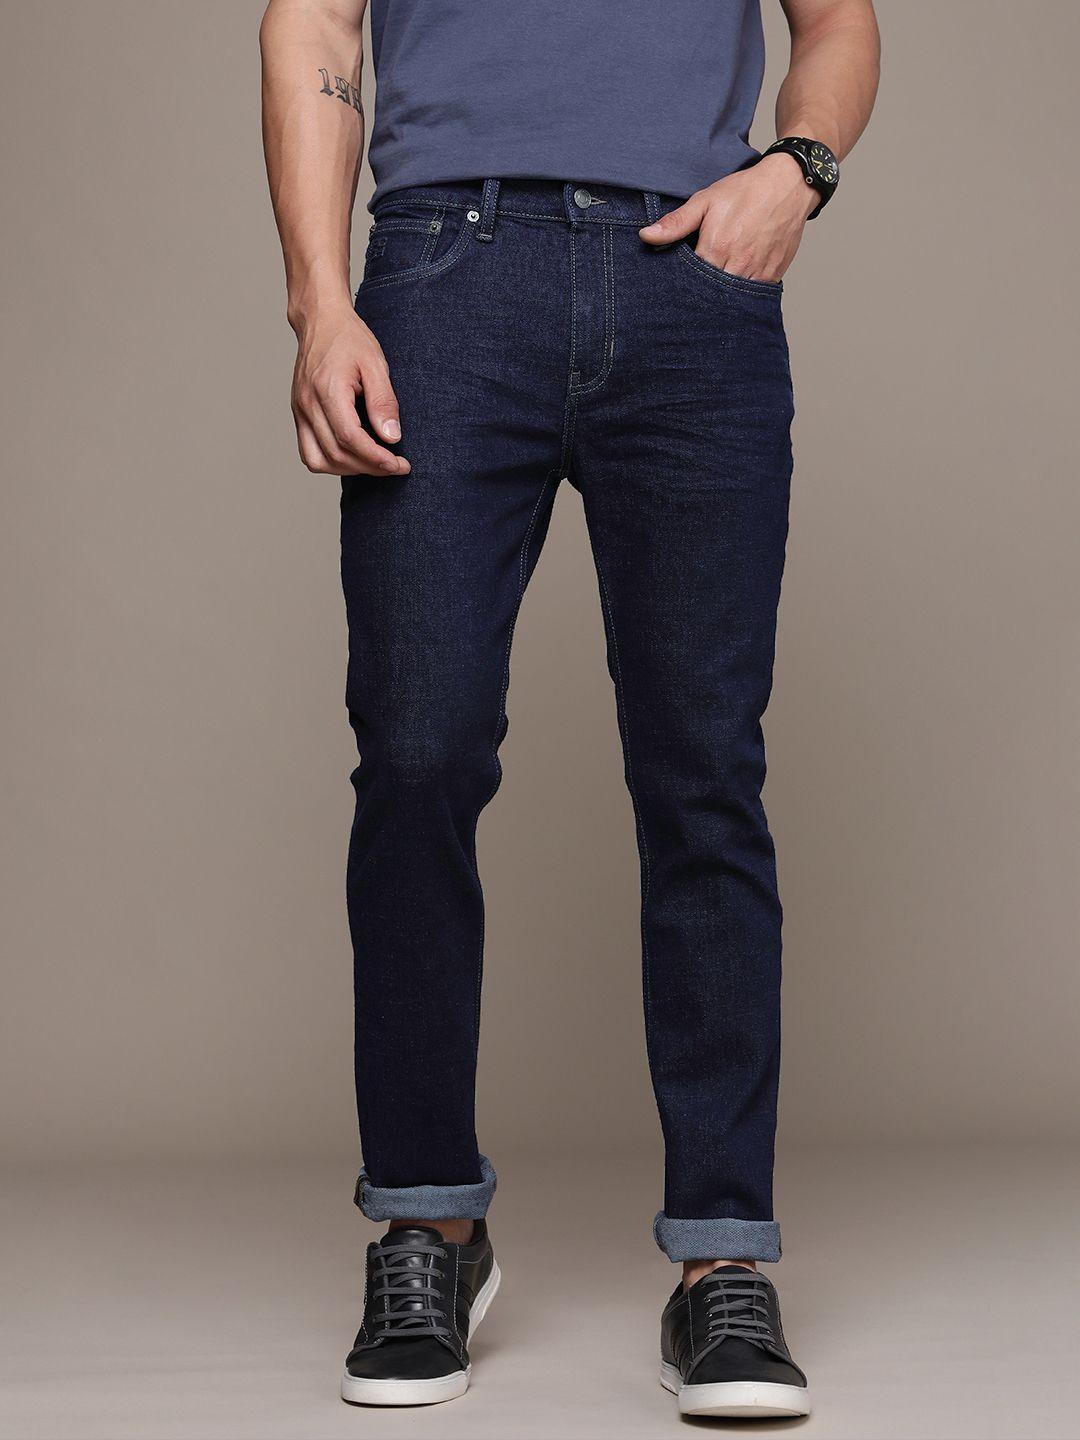 french connection men jeans